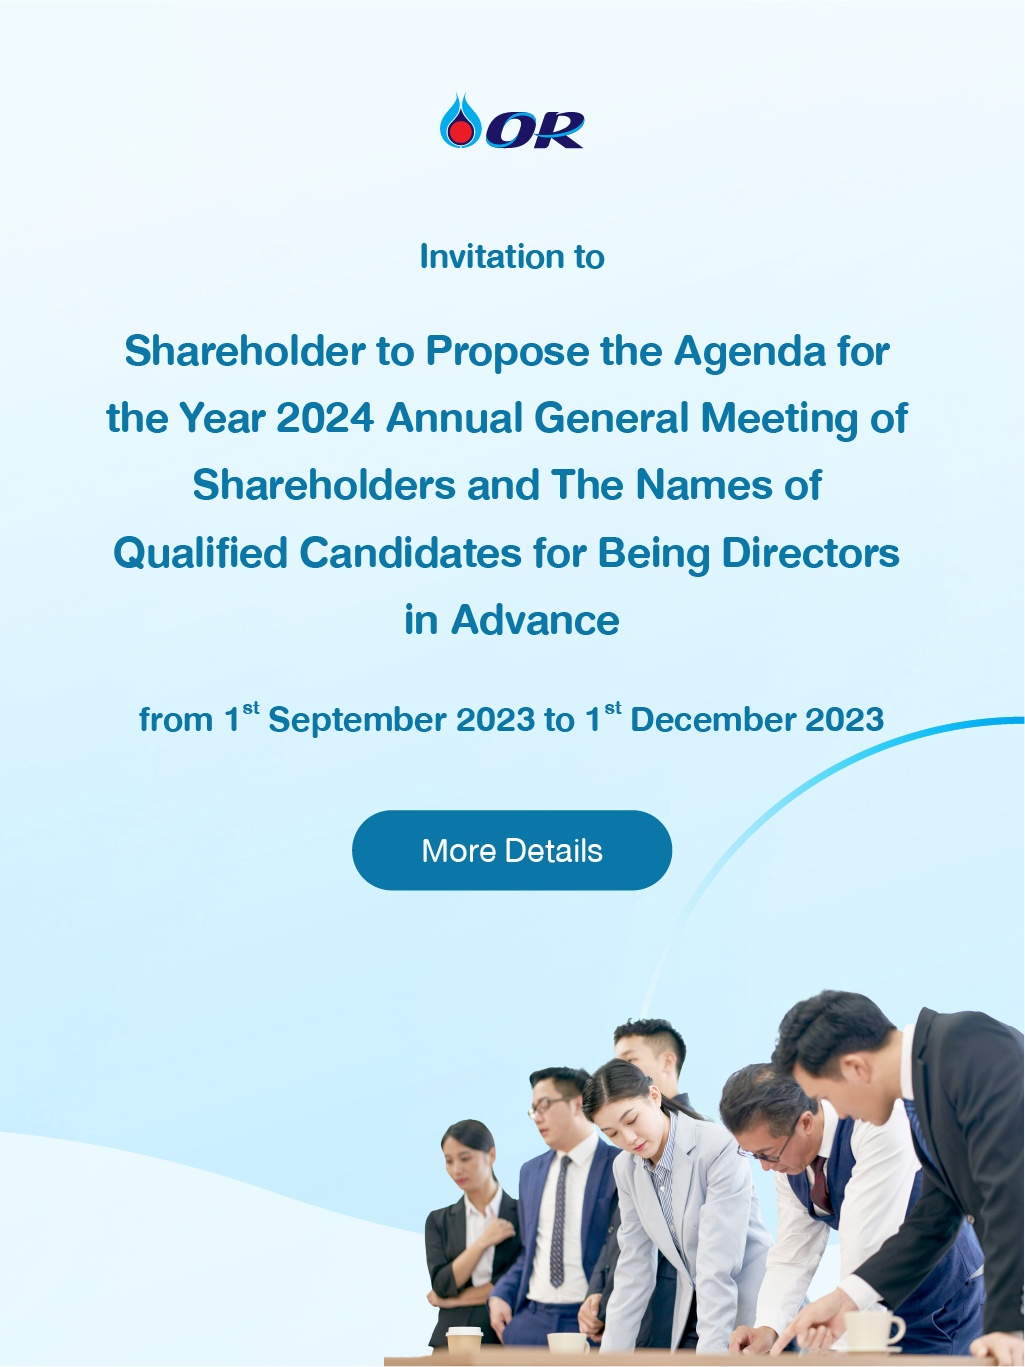 Shareholder to Propose the Agenda for the Year 2024